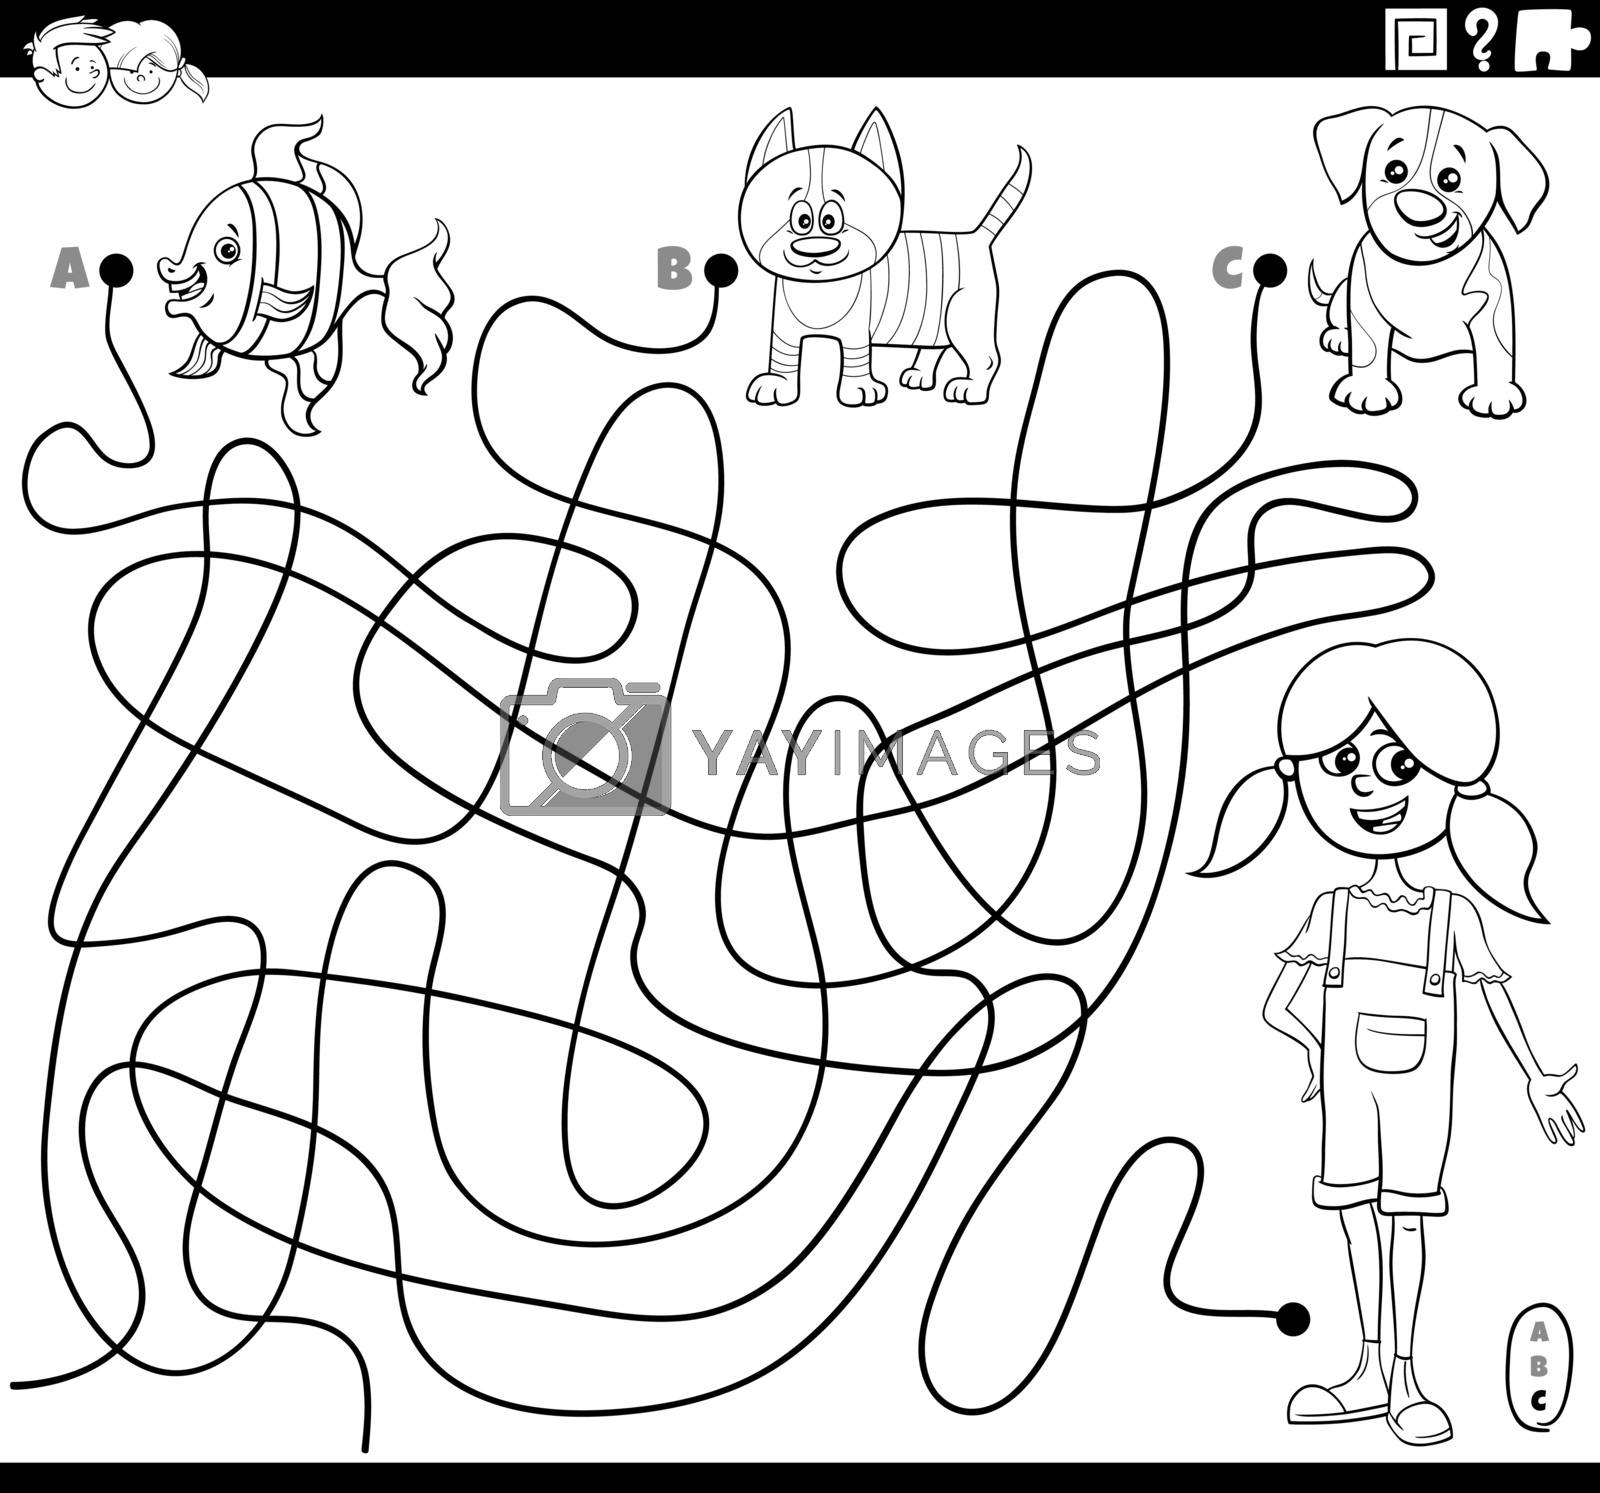 Black and White Cartoon Illustration of Lines Maze Puzzle Game with Comic Girl and Pets Coloring Book Page